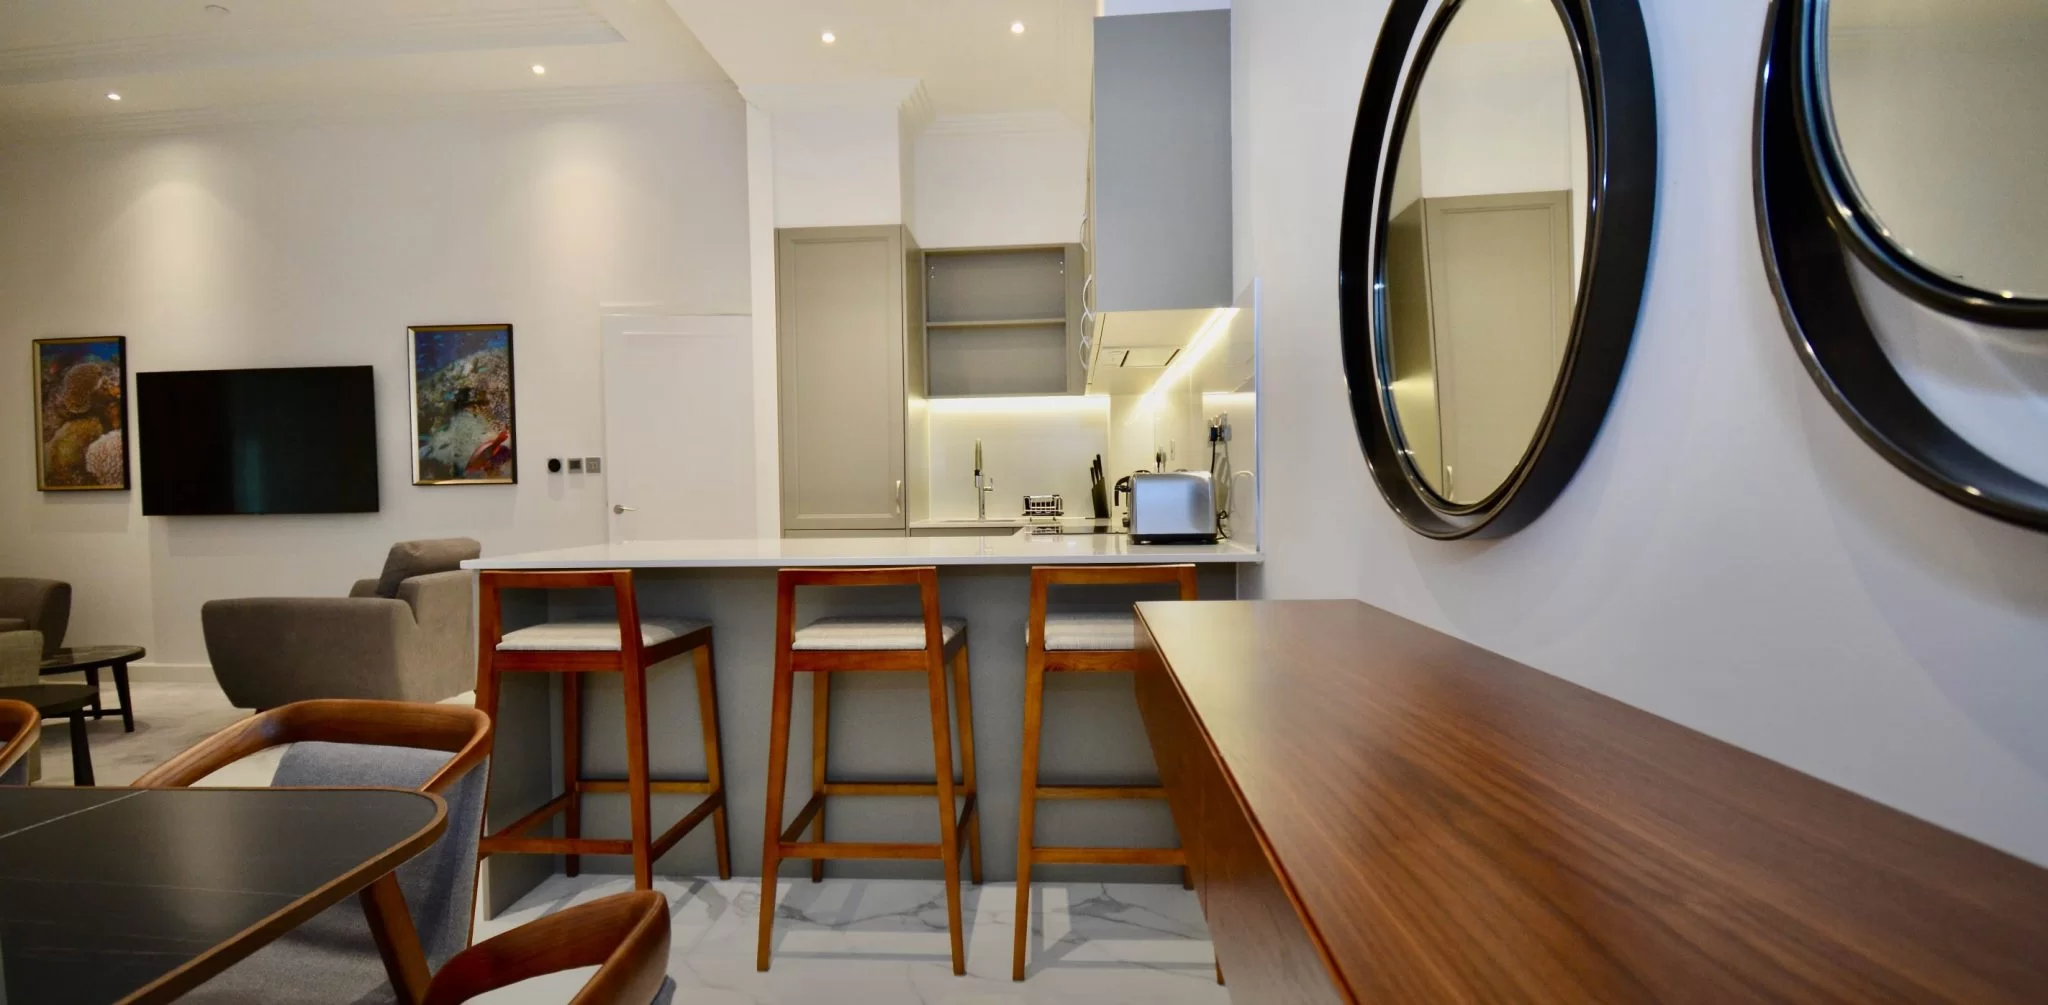 4. 2 Bed Apartment Dining Mirror